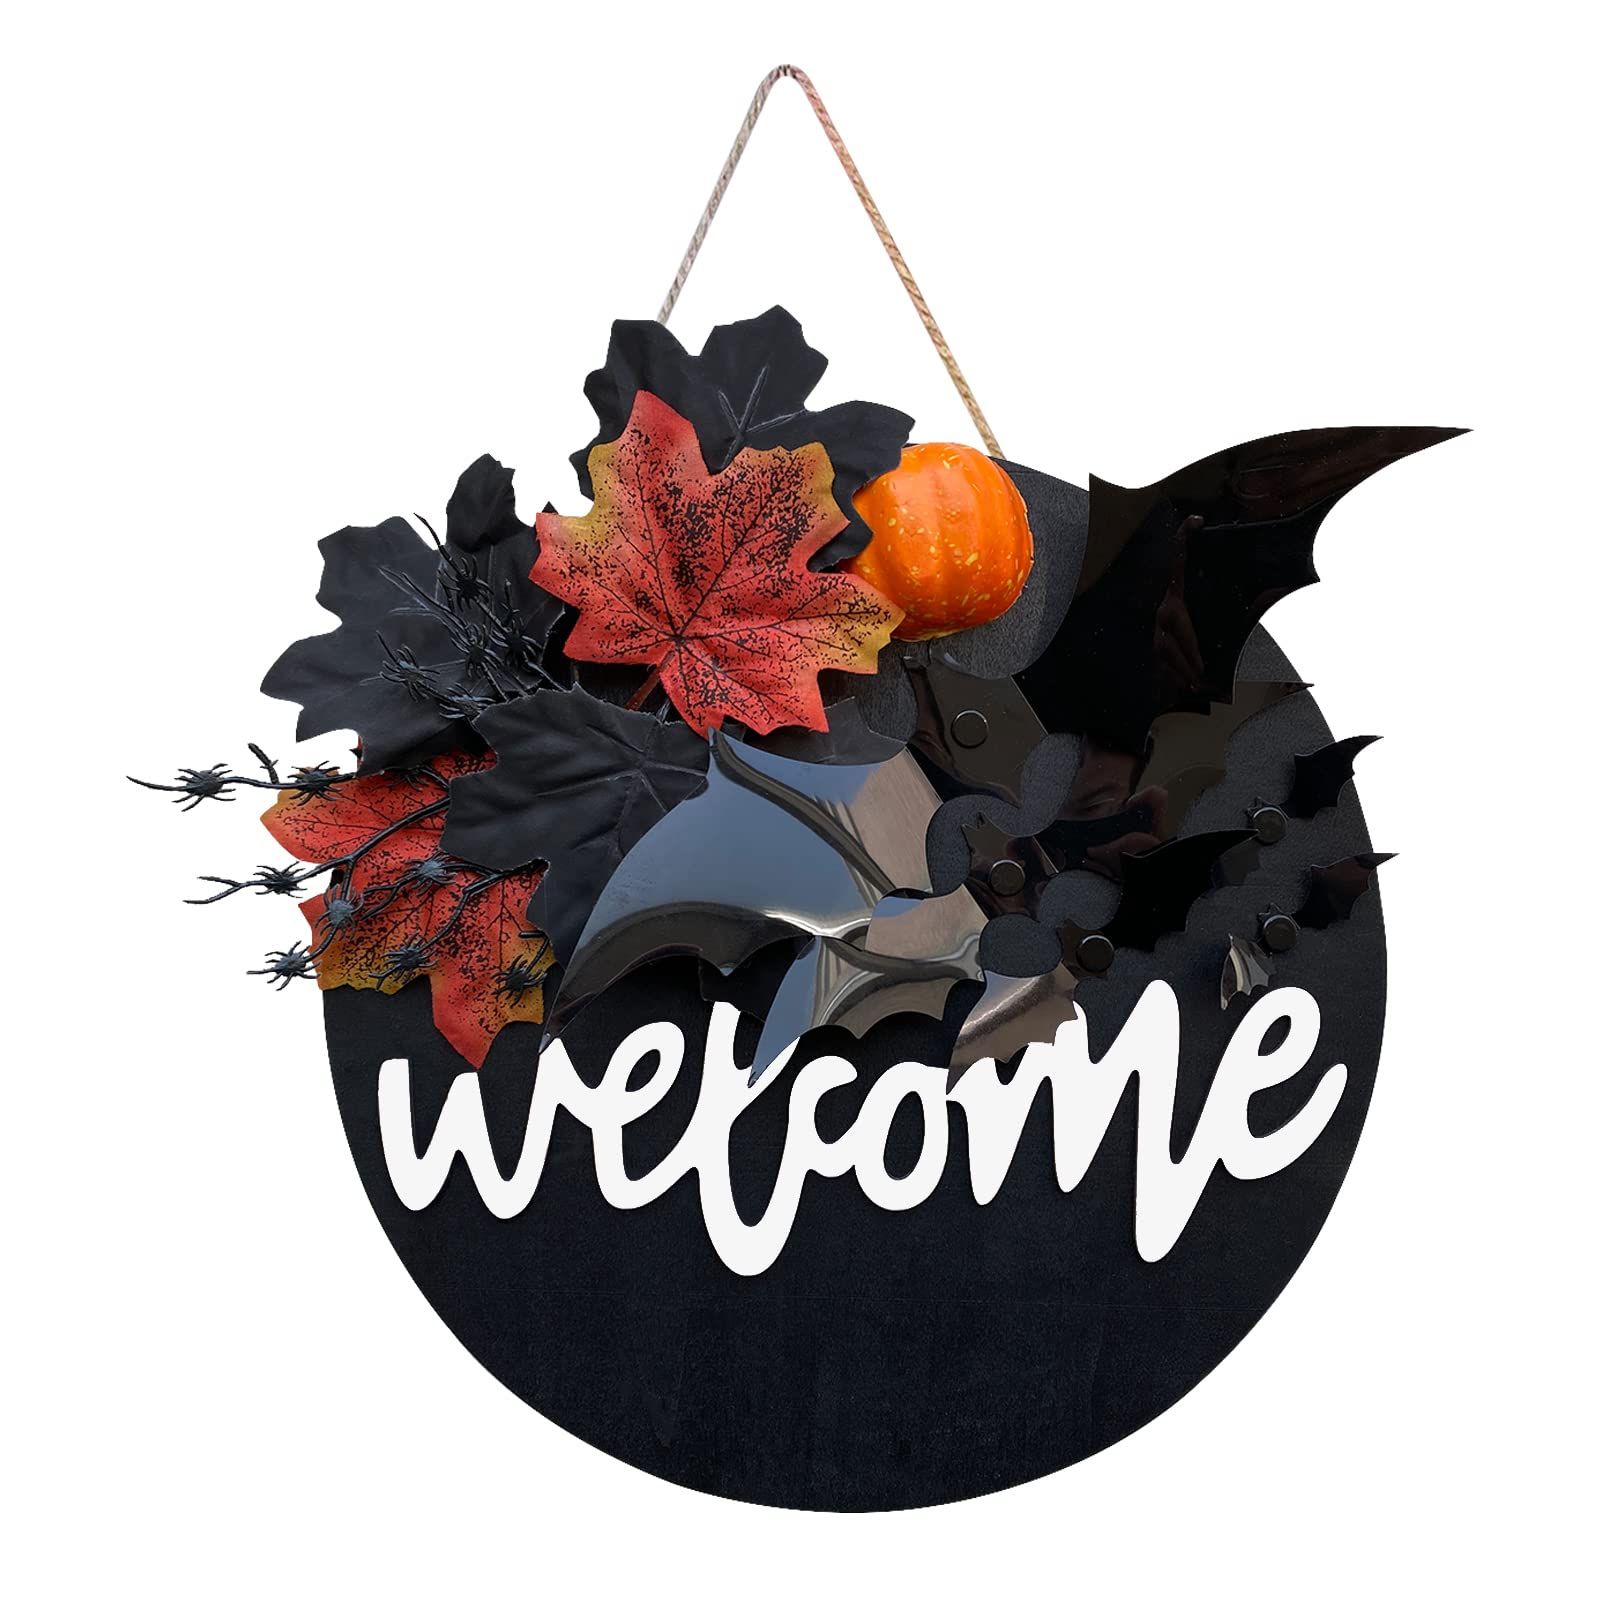 Whesamy Welcome Halloween Wreaths for Front Door Sign Outdoor Decor Black Maple Leaves and Bat Woode | Amazon (US)